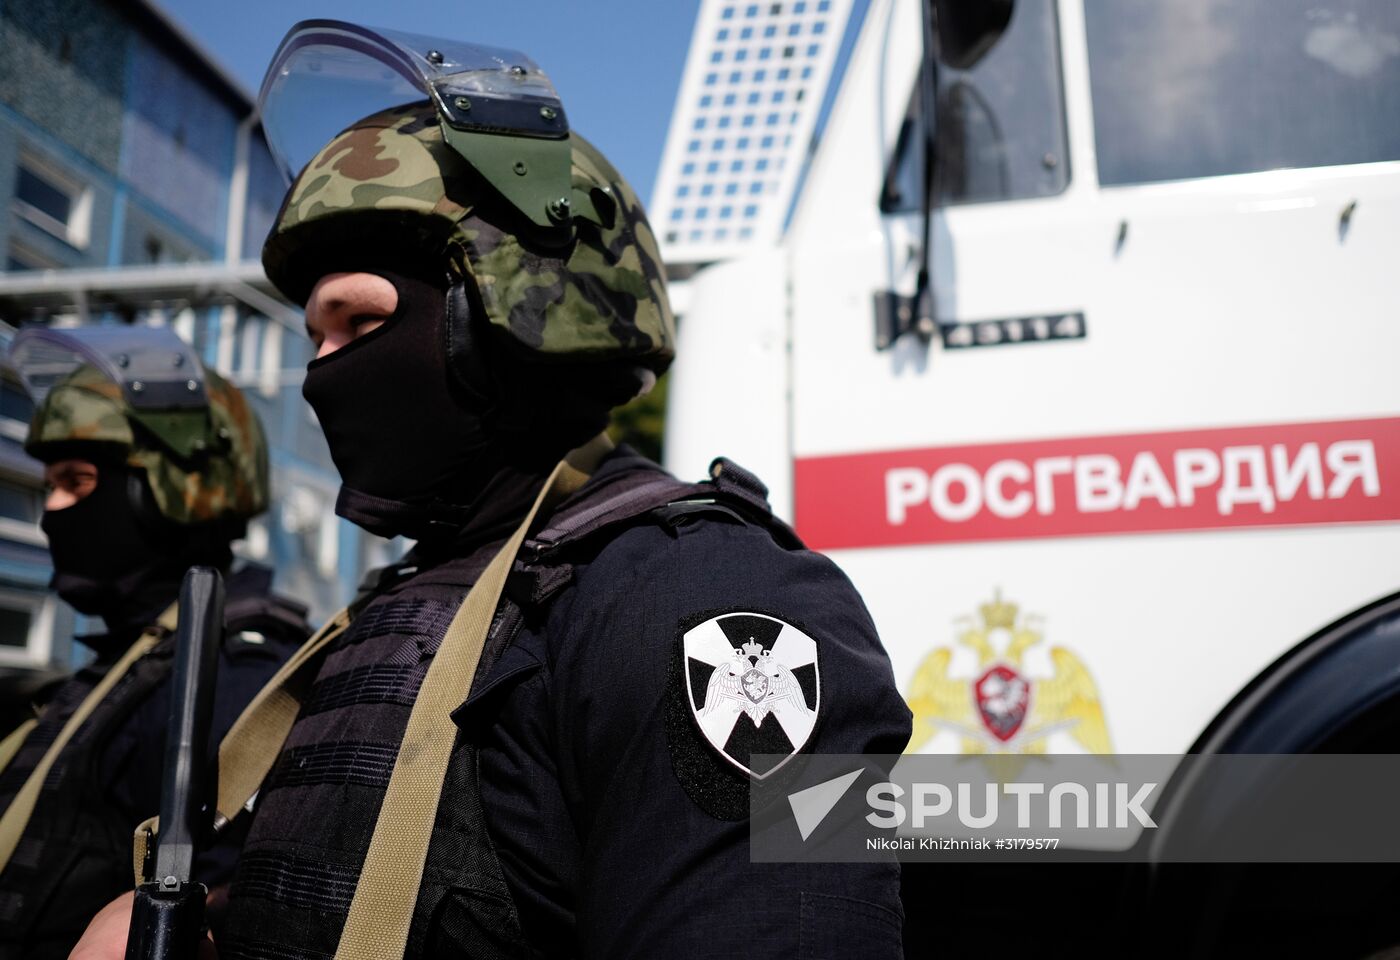 Special Purpose Police Unit of the National Guard Main Administration for Krasnodar Territory